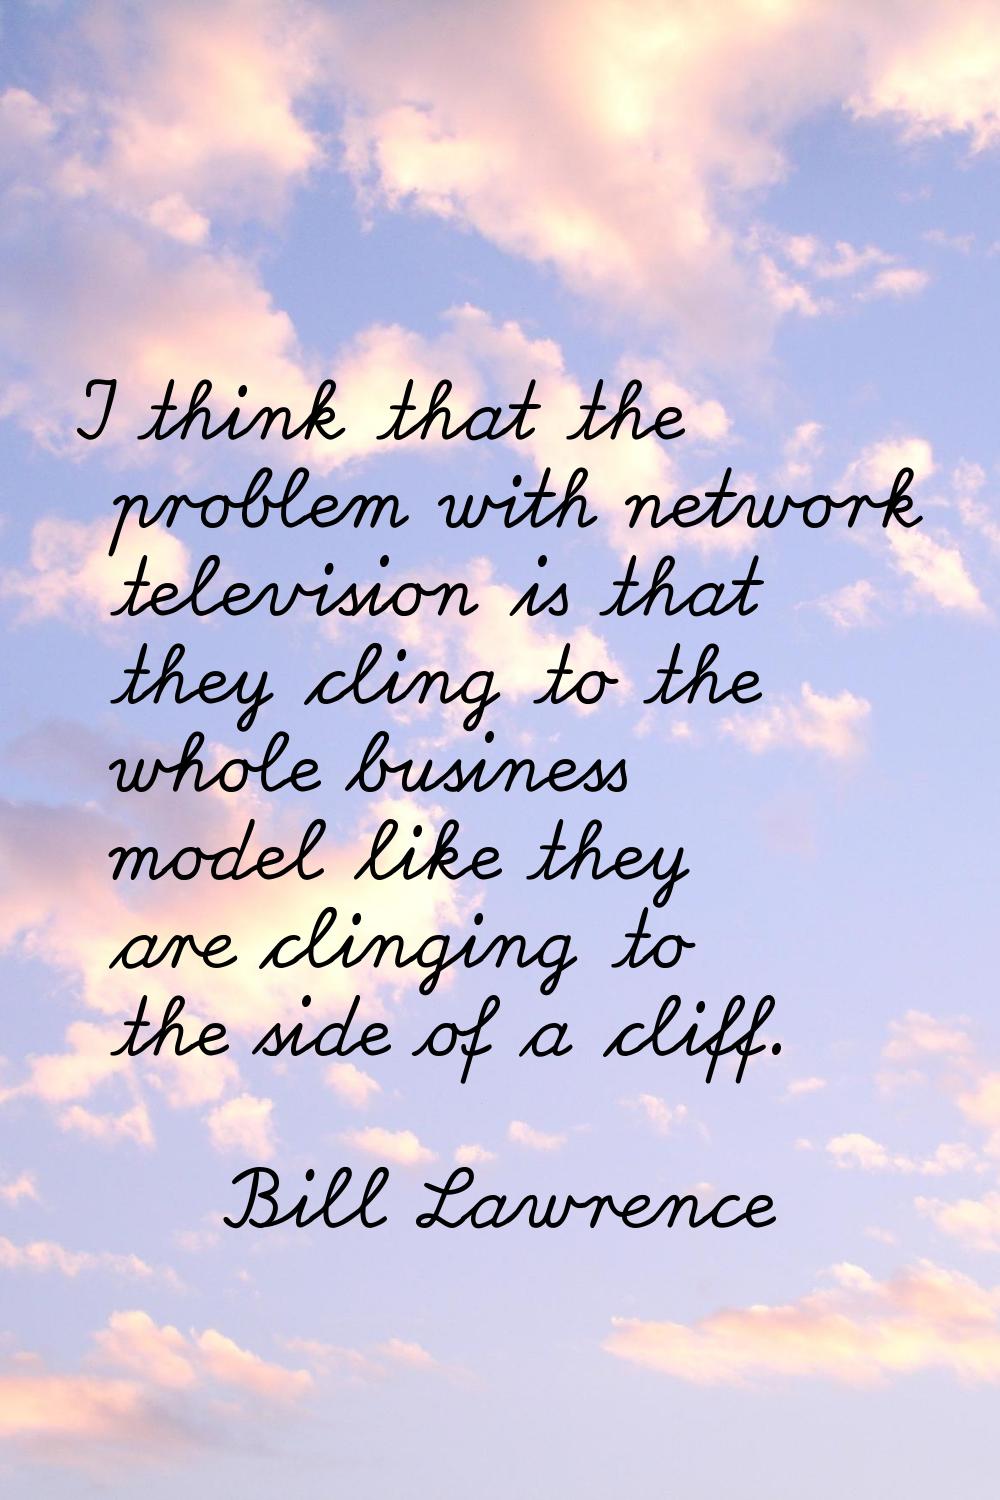 I think that the problem with network television is that they cling to the whole business model lik